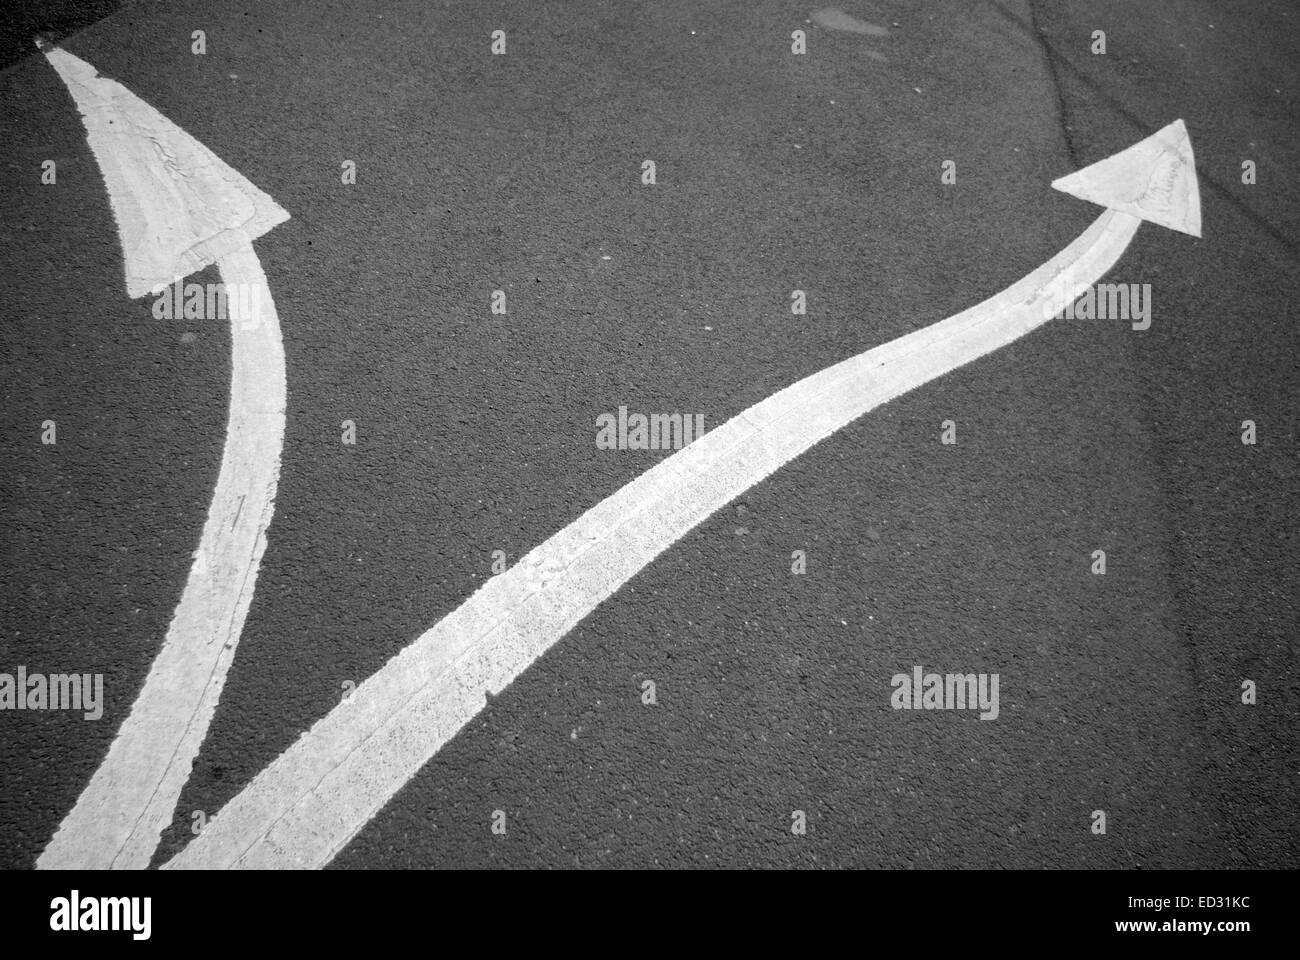 Curved white arrows painted on black tarmac Stock Photo